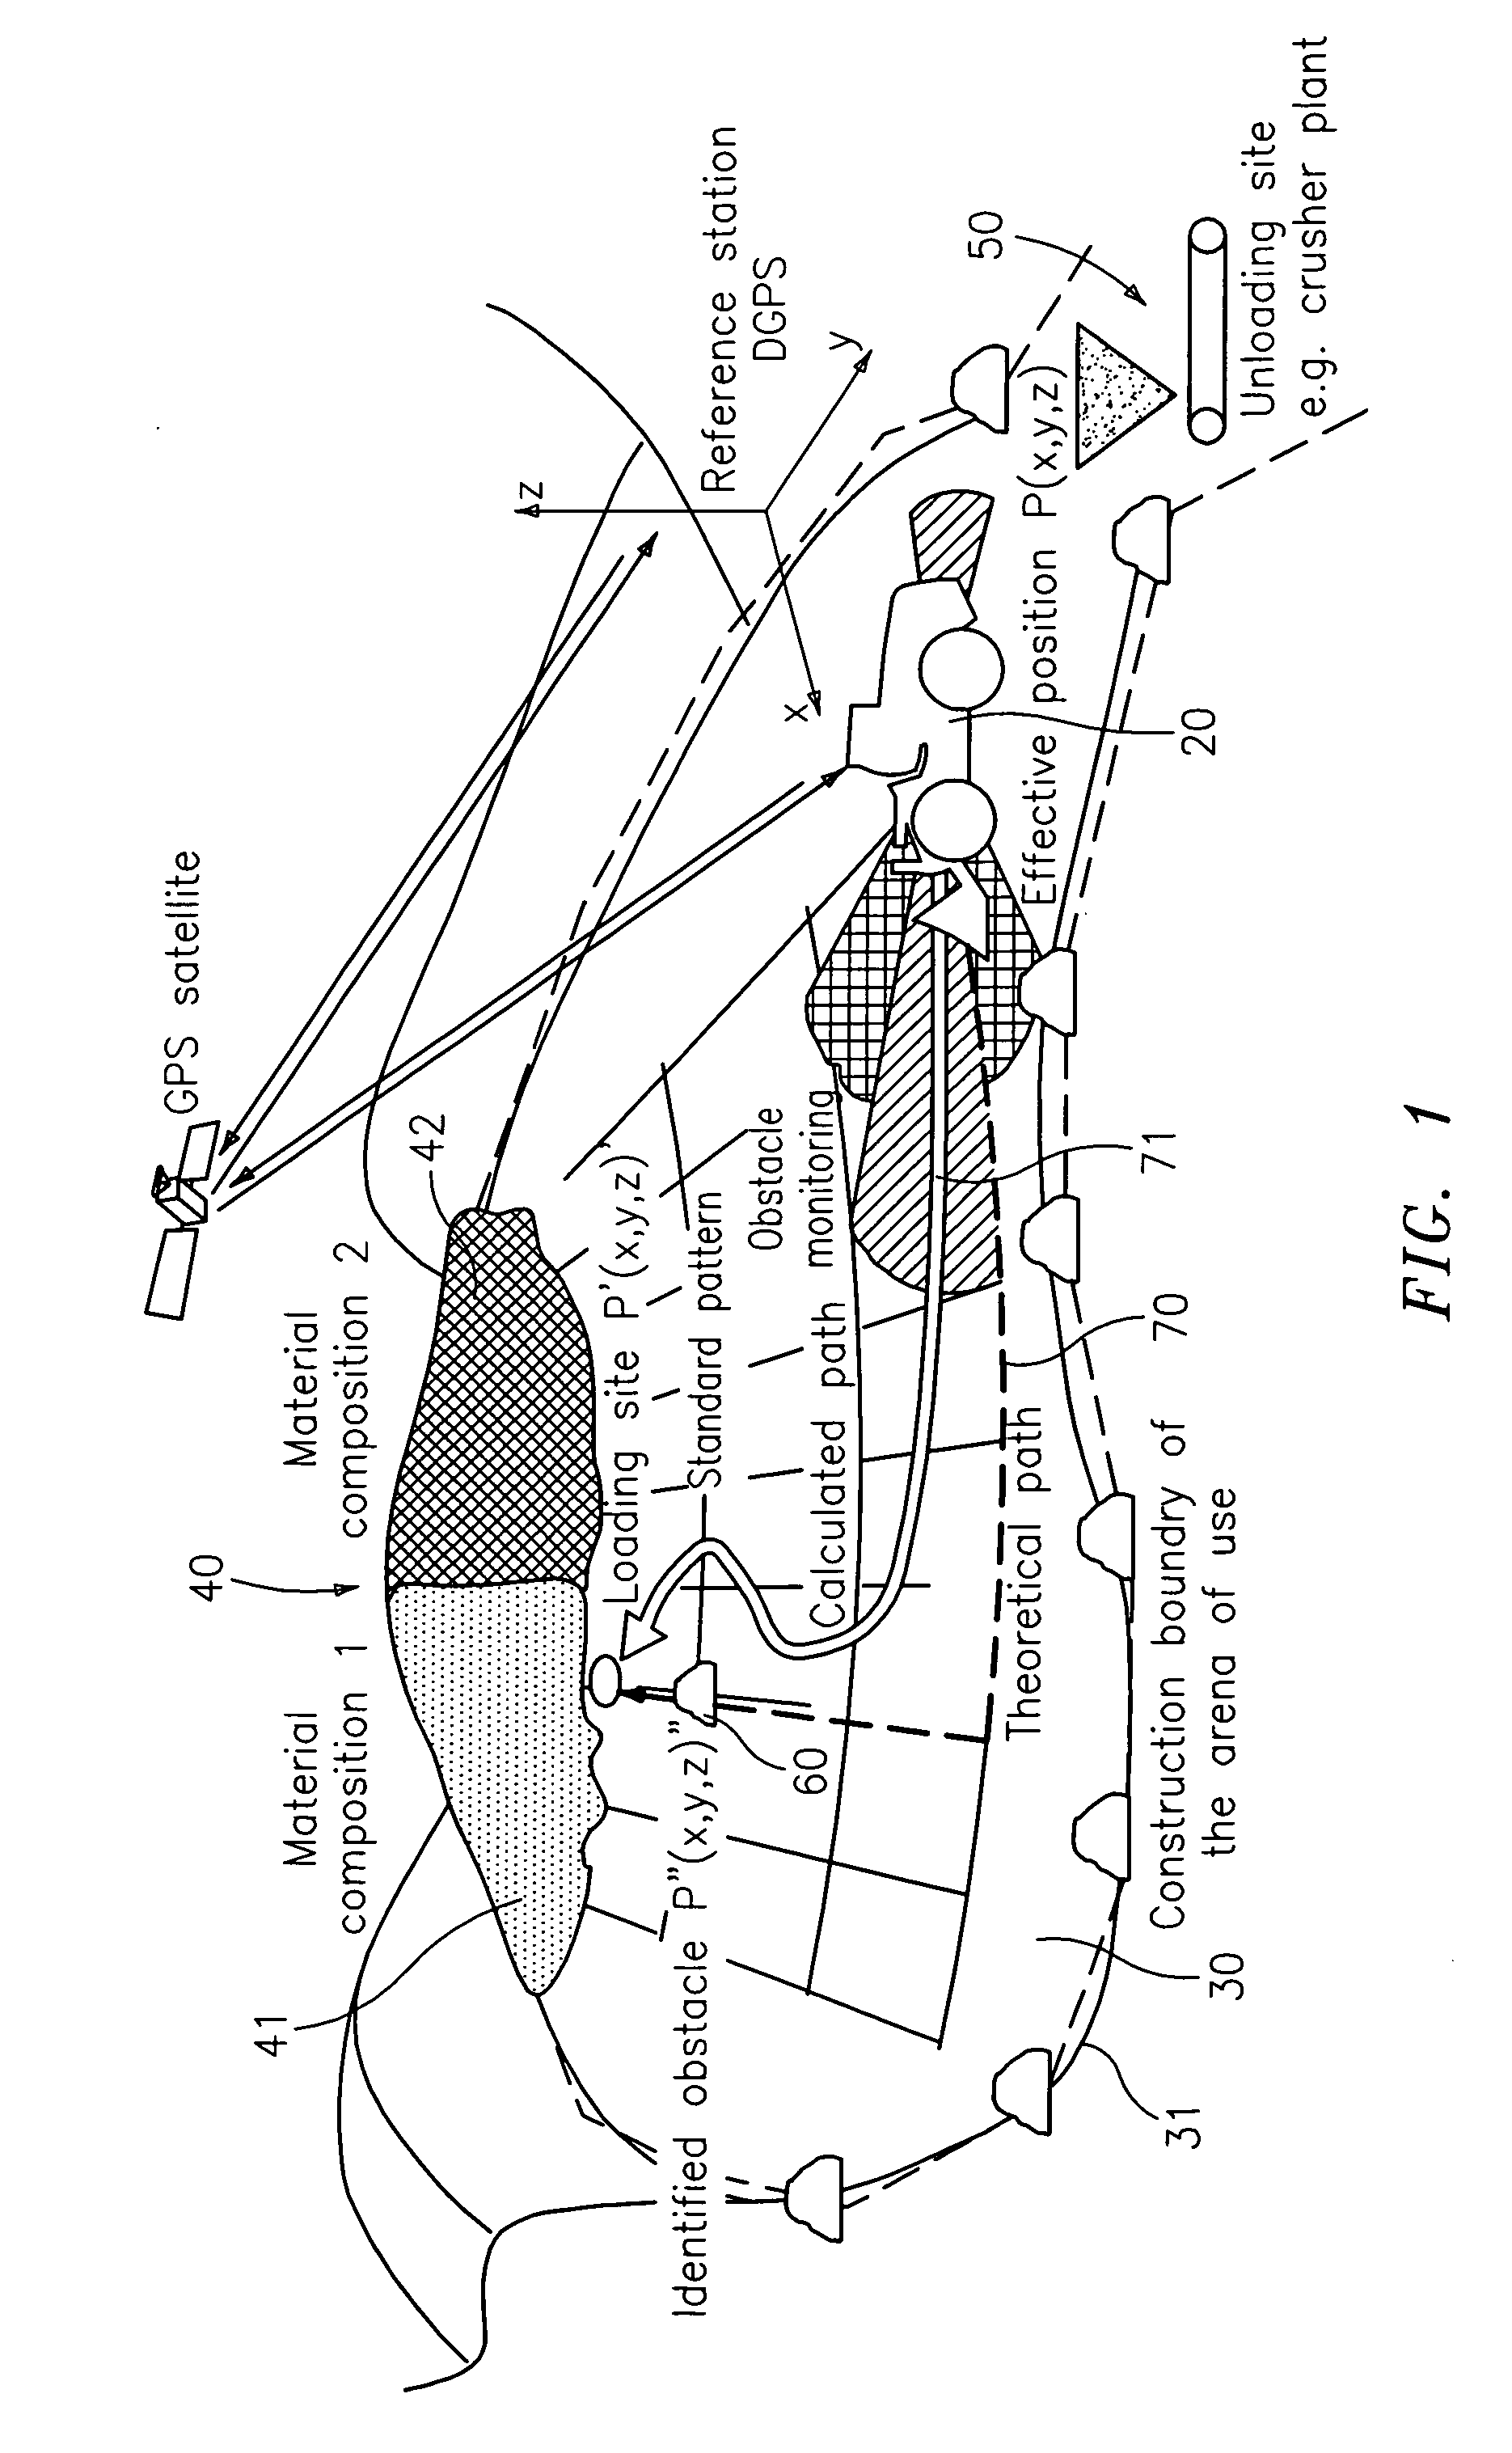 System for the automatic movement of material